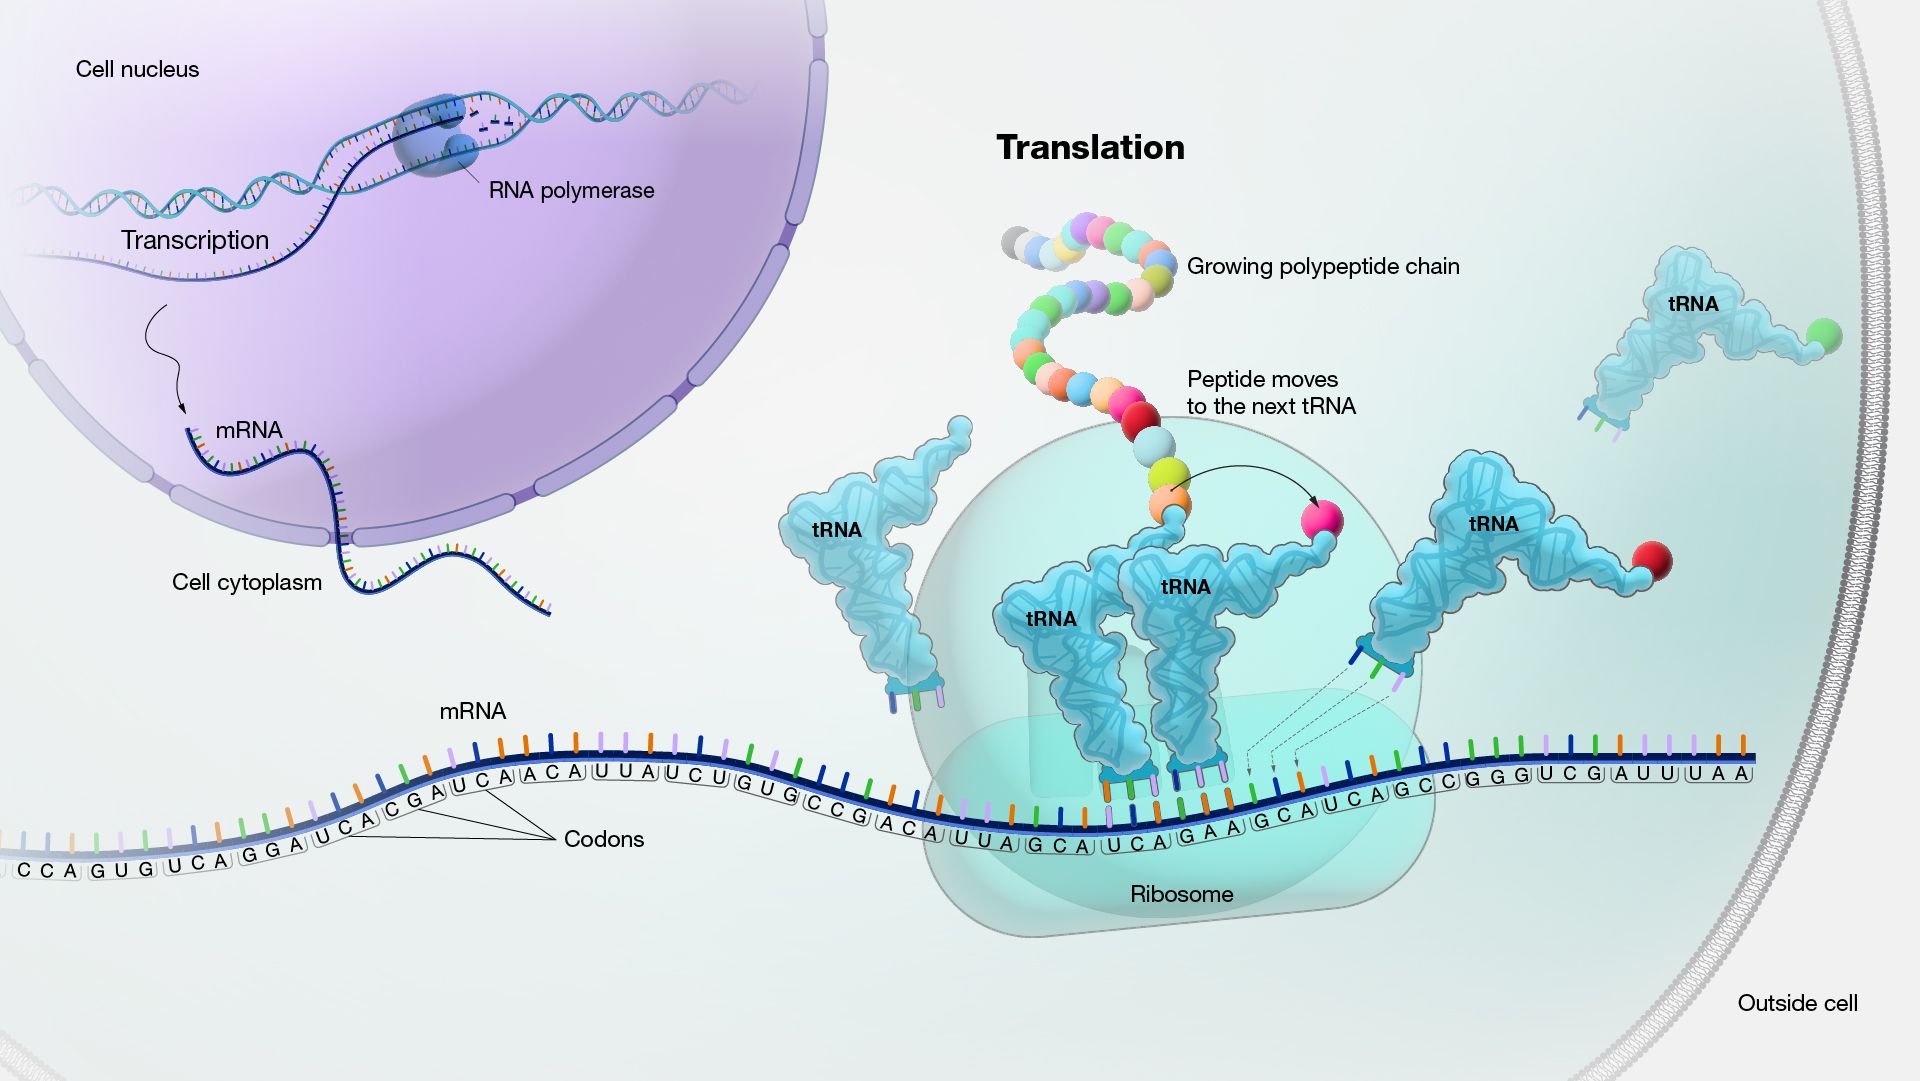 mRNA moves genetic information from the cell nucleus to the cell cytoplasm in a form that ribosomes to synthesise proteins. Image from the NIH National Human Genome Research Institute.